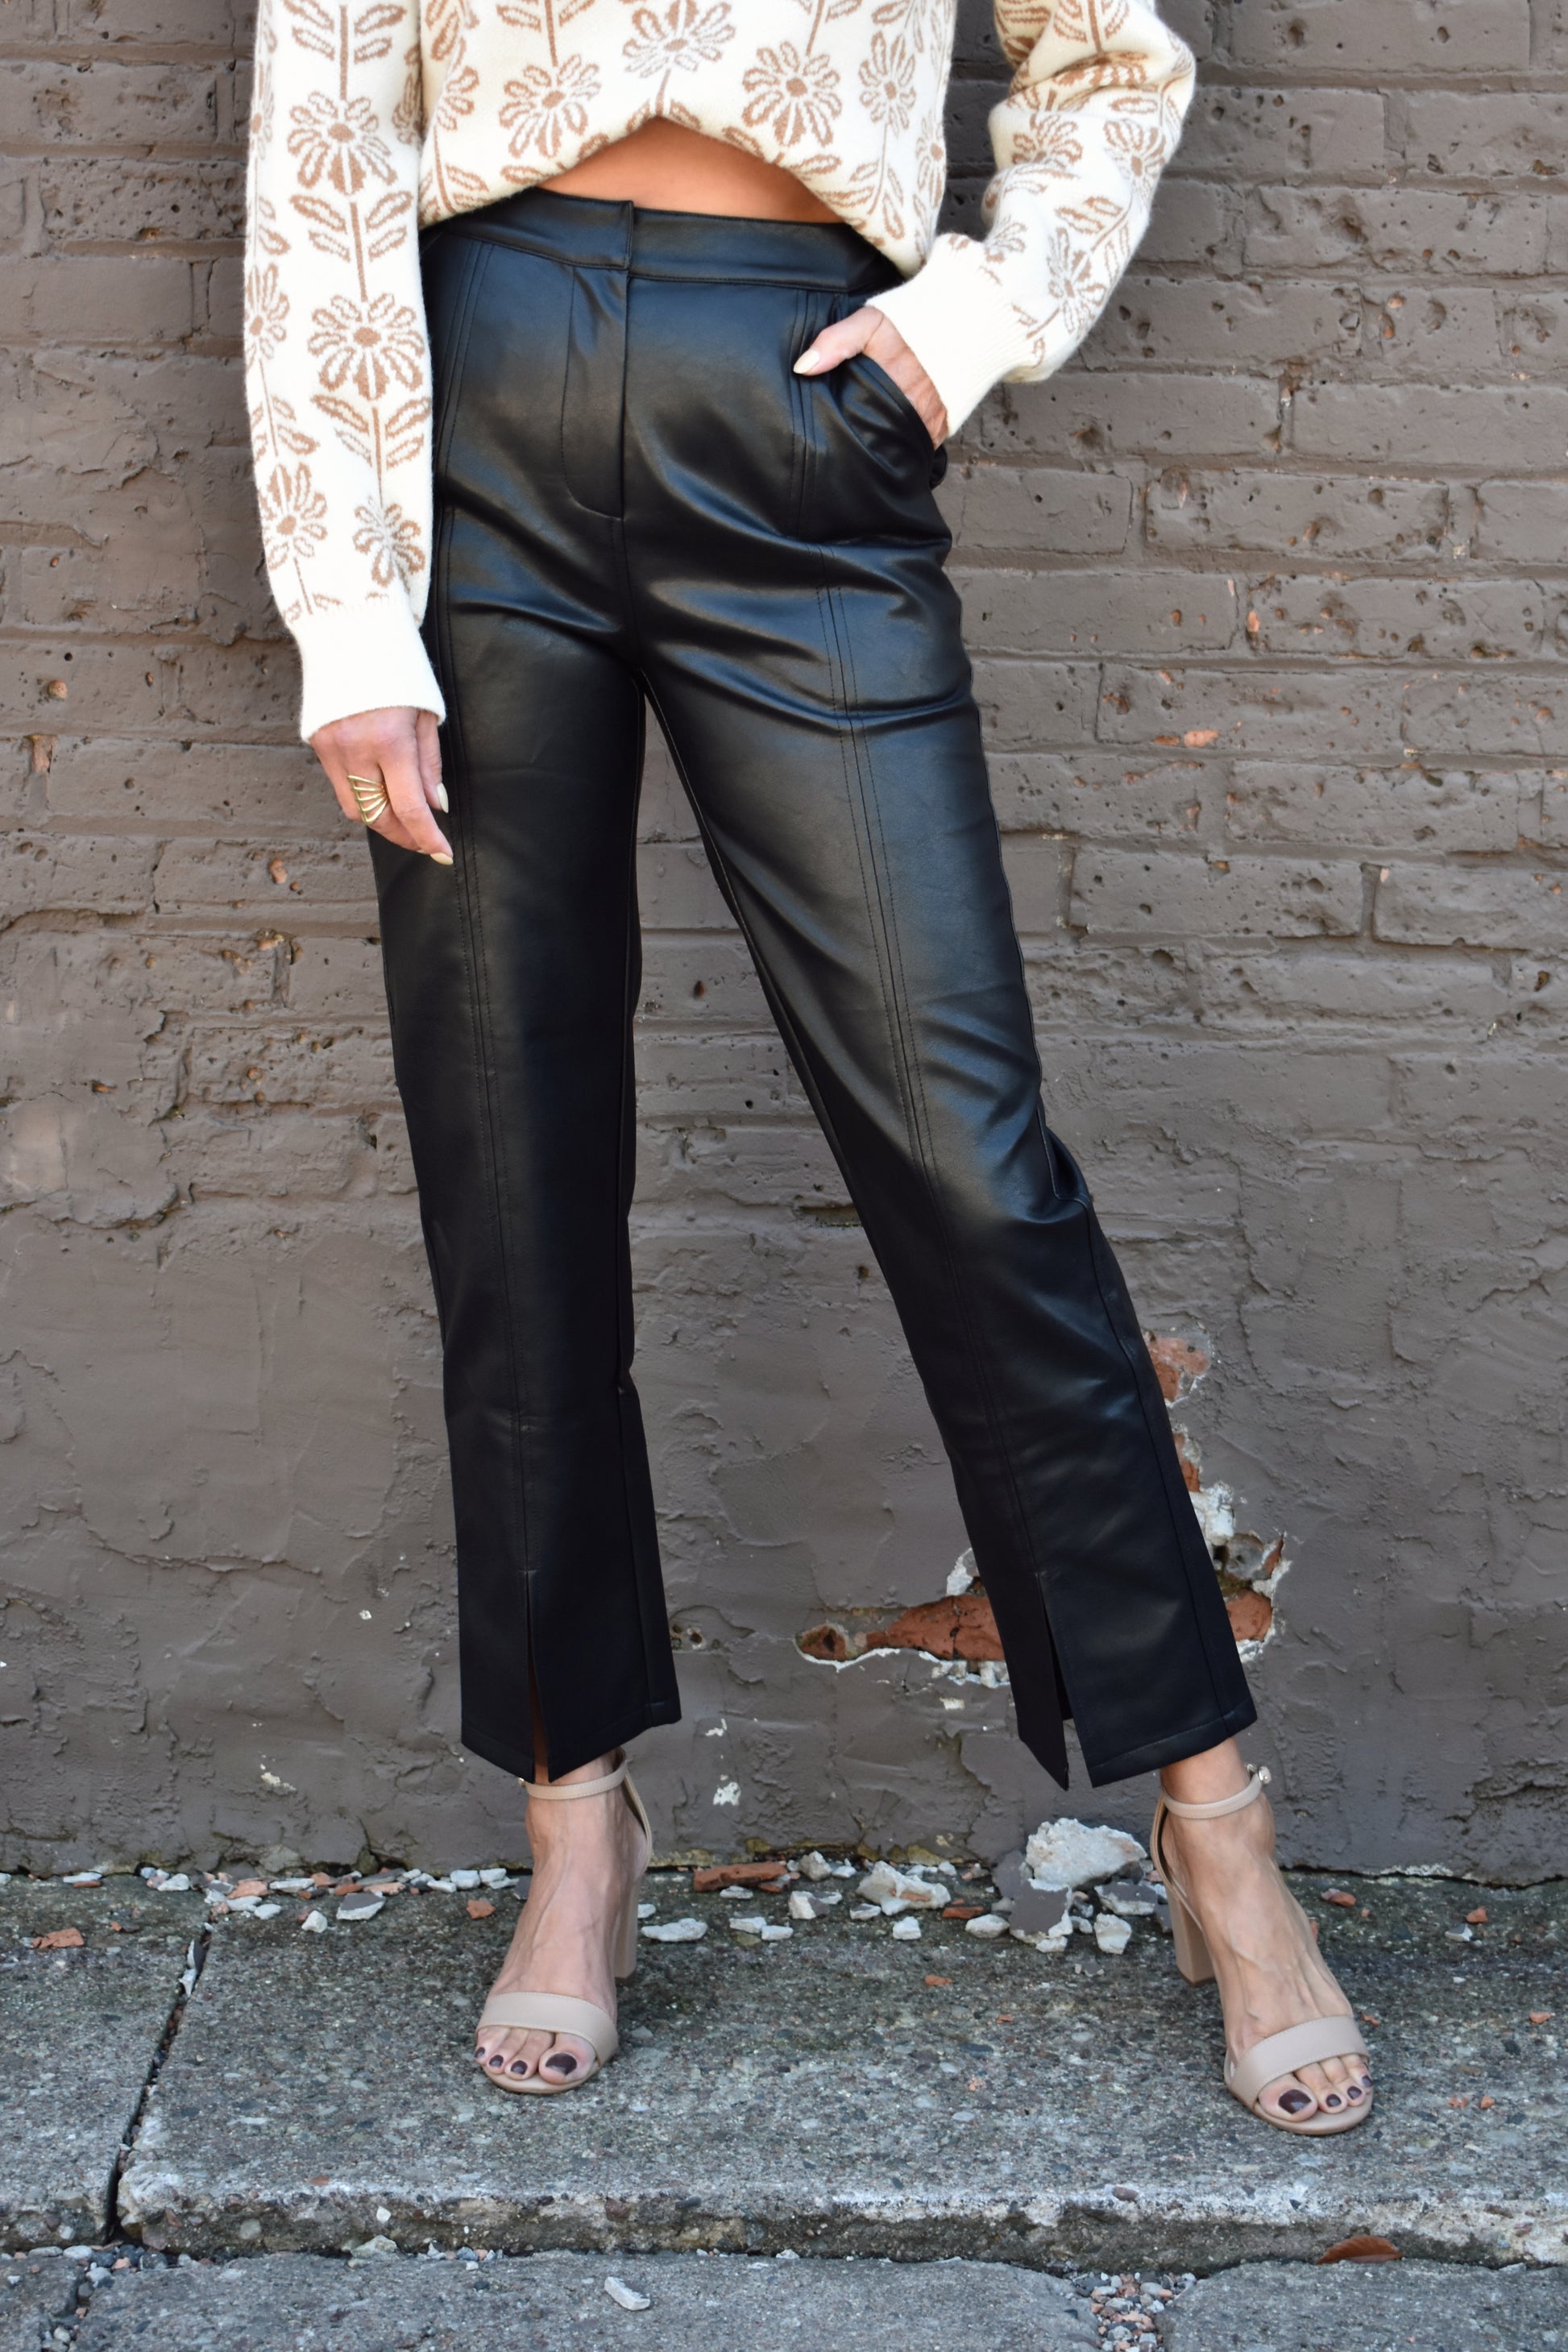 black vegan leather pants straight fit, high waisted, side pockets, slit hem on the front part of the ankle, stitching detail down the middle of the pant legs on the front. 